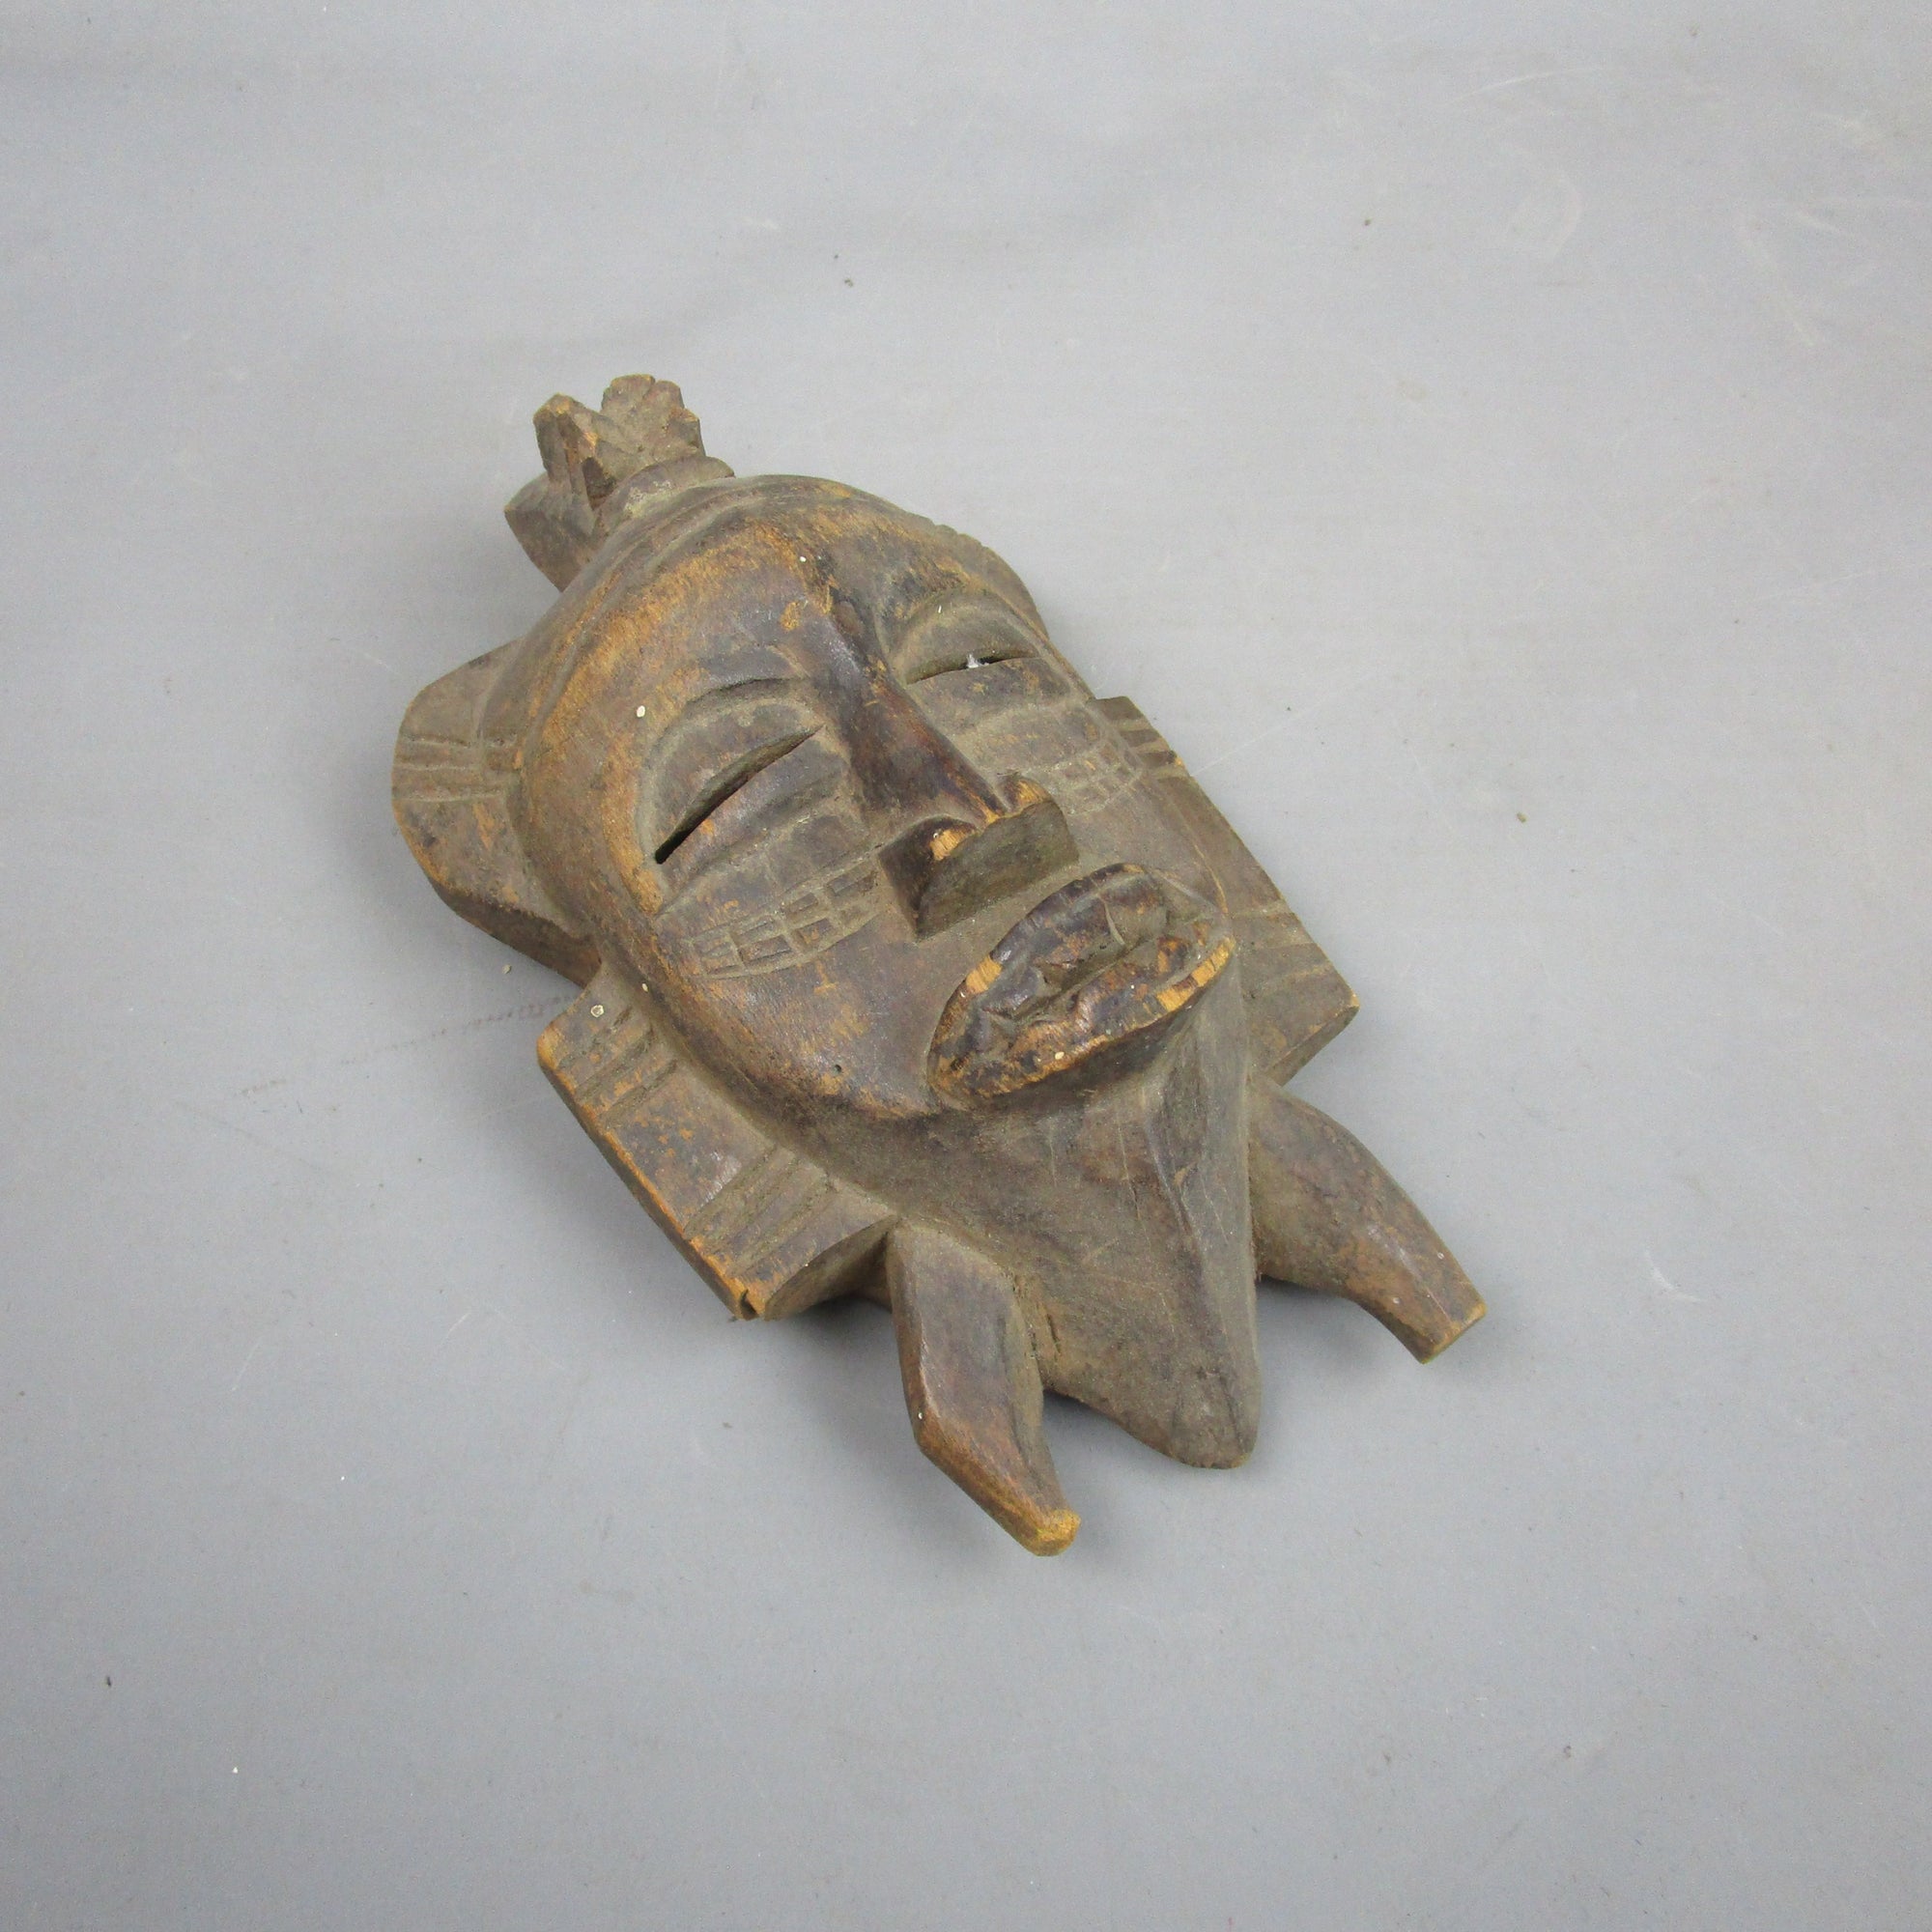 Small Hand Carved Wooden African Tribal Ceremonial Mask Antique c1890